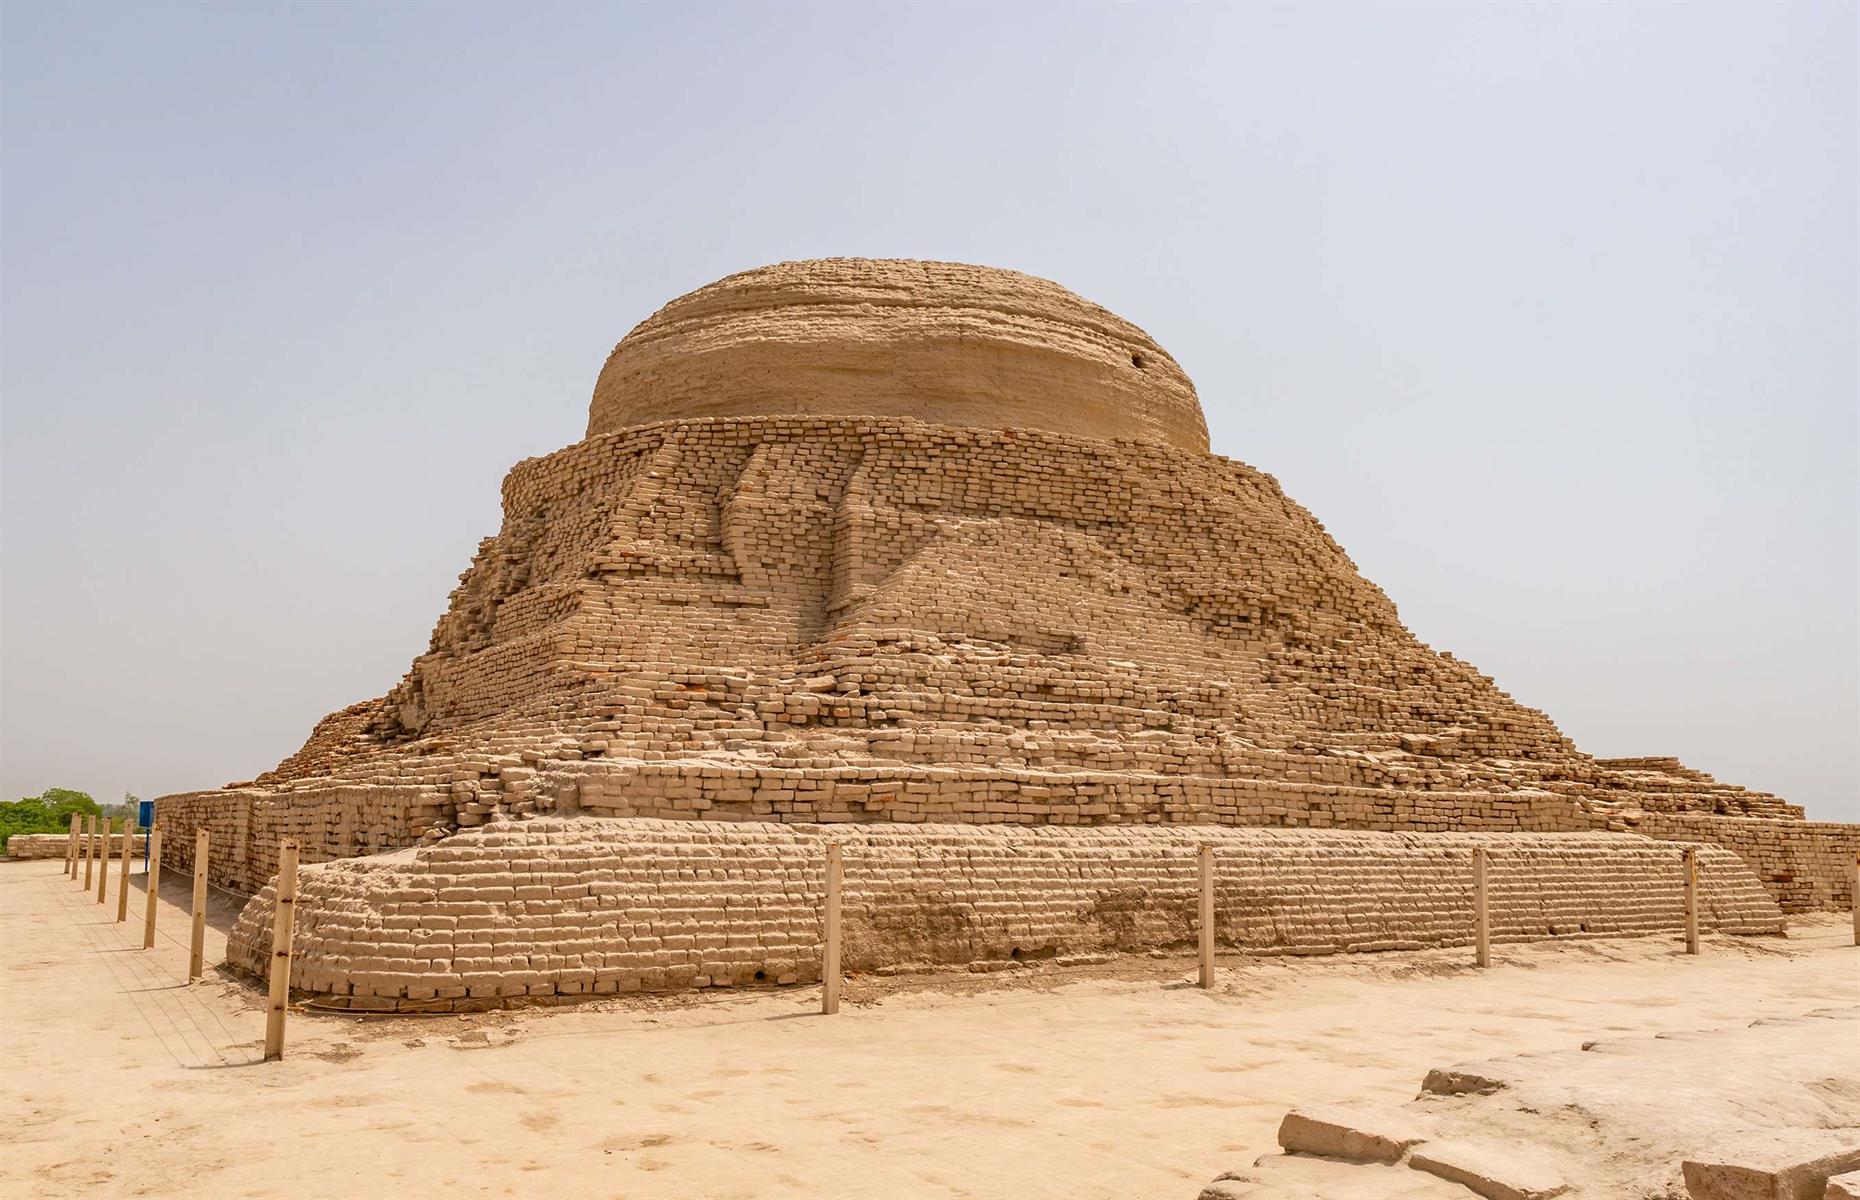 <p>A UNESCO World Heritage Site, Mohenjo-daro was built by the ancient Indus Valley civilisation and contains a grid system of baked brick houses, a large granary and at least two assembly halls. The site's most important building, a large hemispherical 'stupa' associated with worship, was mercifully undamaged.</p>  <p><strong>Liked this? Click on the Follow button above for more great stories from loveEXPLORING</strong></p>  <p><a href="https://www.loveexploring.com/galleries/273069/the-worlds-oldest-landmarks-still-attracting-the-crowds-today"><strong>Now check out the world's oldest attractions still loved by tourists today...</strong></a></p>